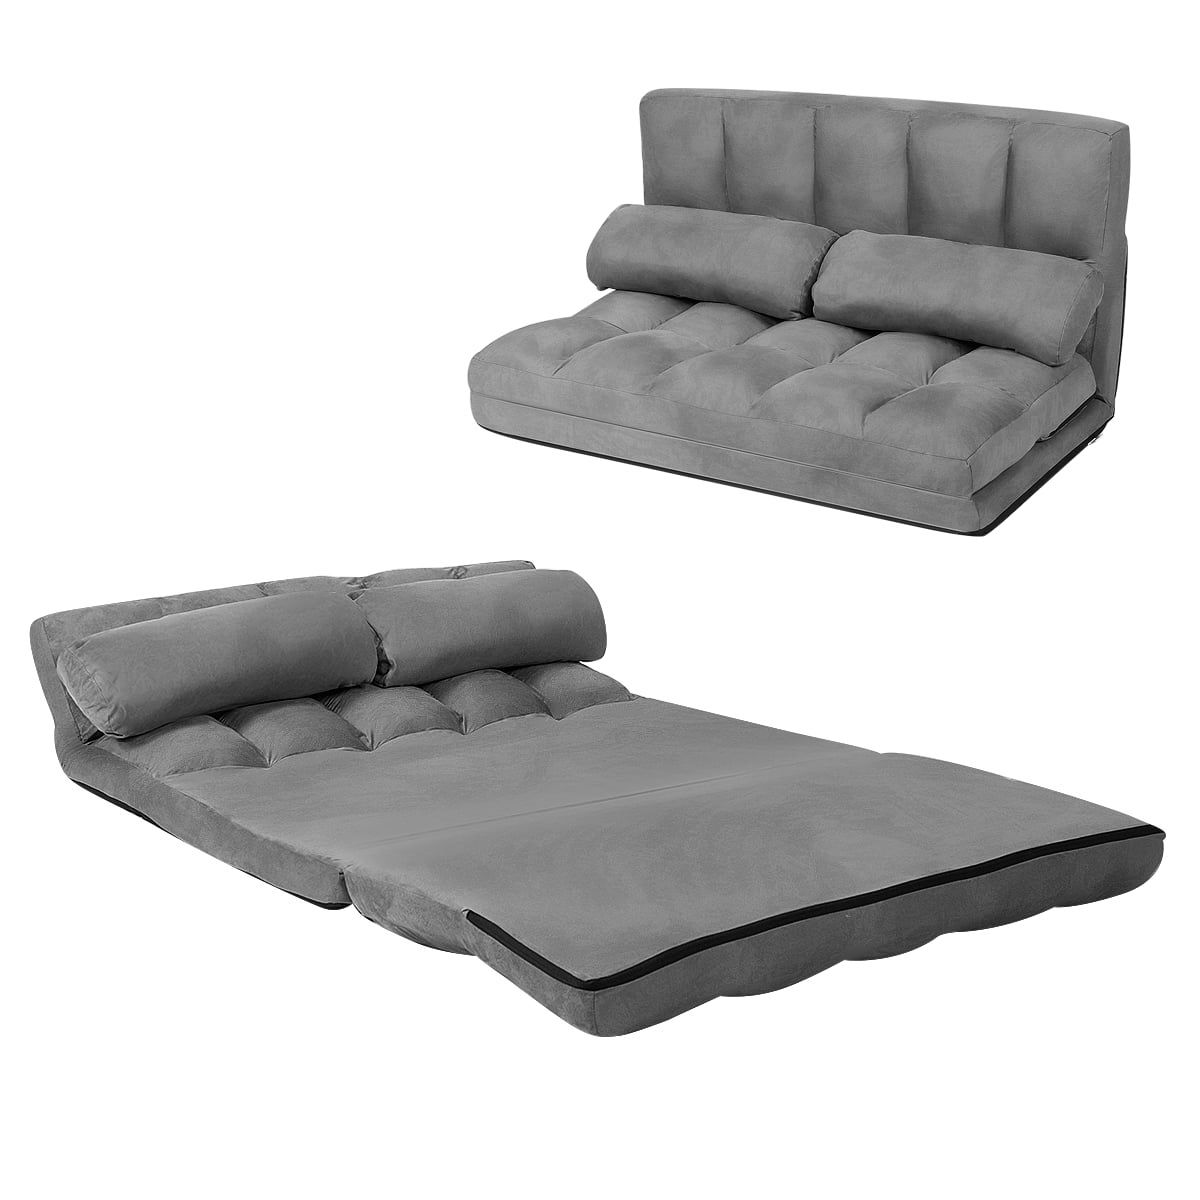 Topbuy Adjustable Floor Sofa Foldable Lazy Sofa Bed With 2 Pillows Grey Pertaining To 2 In 1 Foldable Sofas (Gallery 18 of 20)